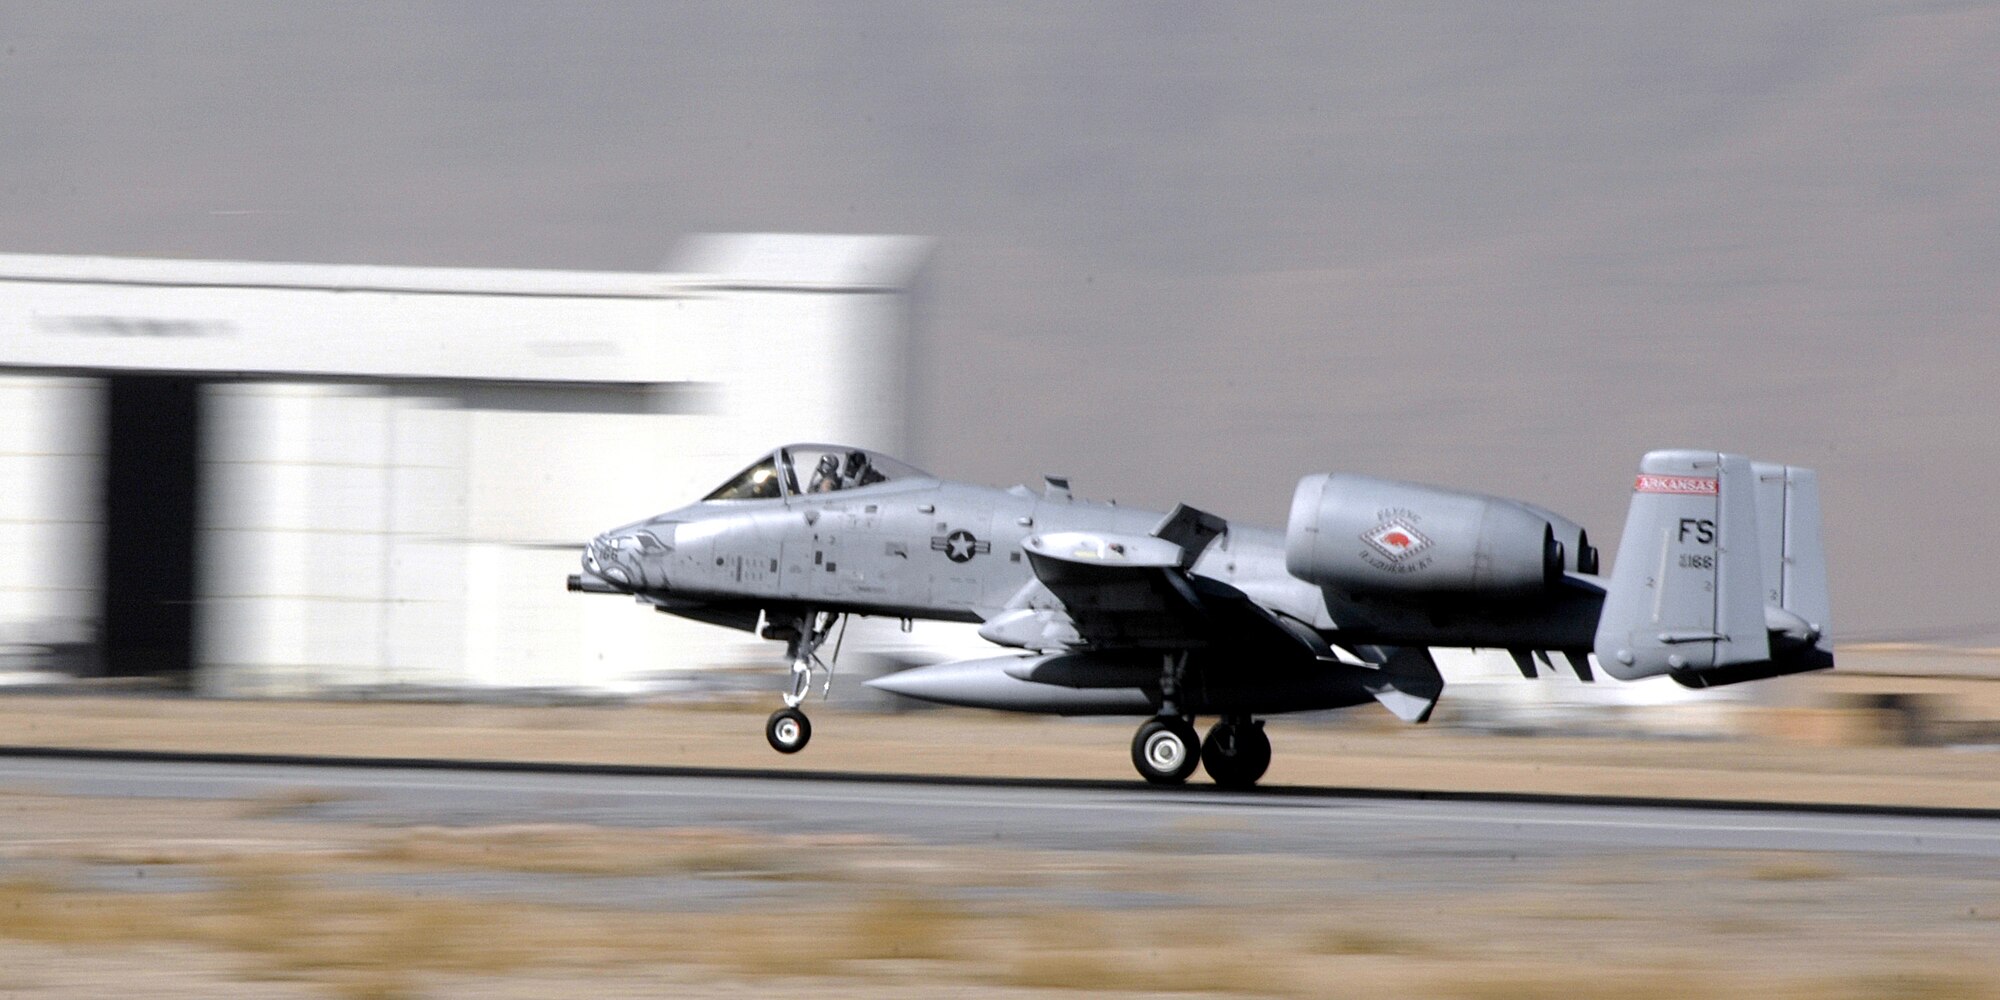 An Arkansas ANG A-10 Thunderbolt II lands at Kandahar Airfield during the change over from the 354th Expeditionary Fighter Squadron to the 104th Expeditionary Fighter Squadron, Jan. 13, 2010. (U.S. Air Force photo/Senior Airman Timothy Taylor/Released)